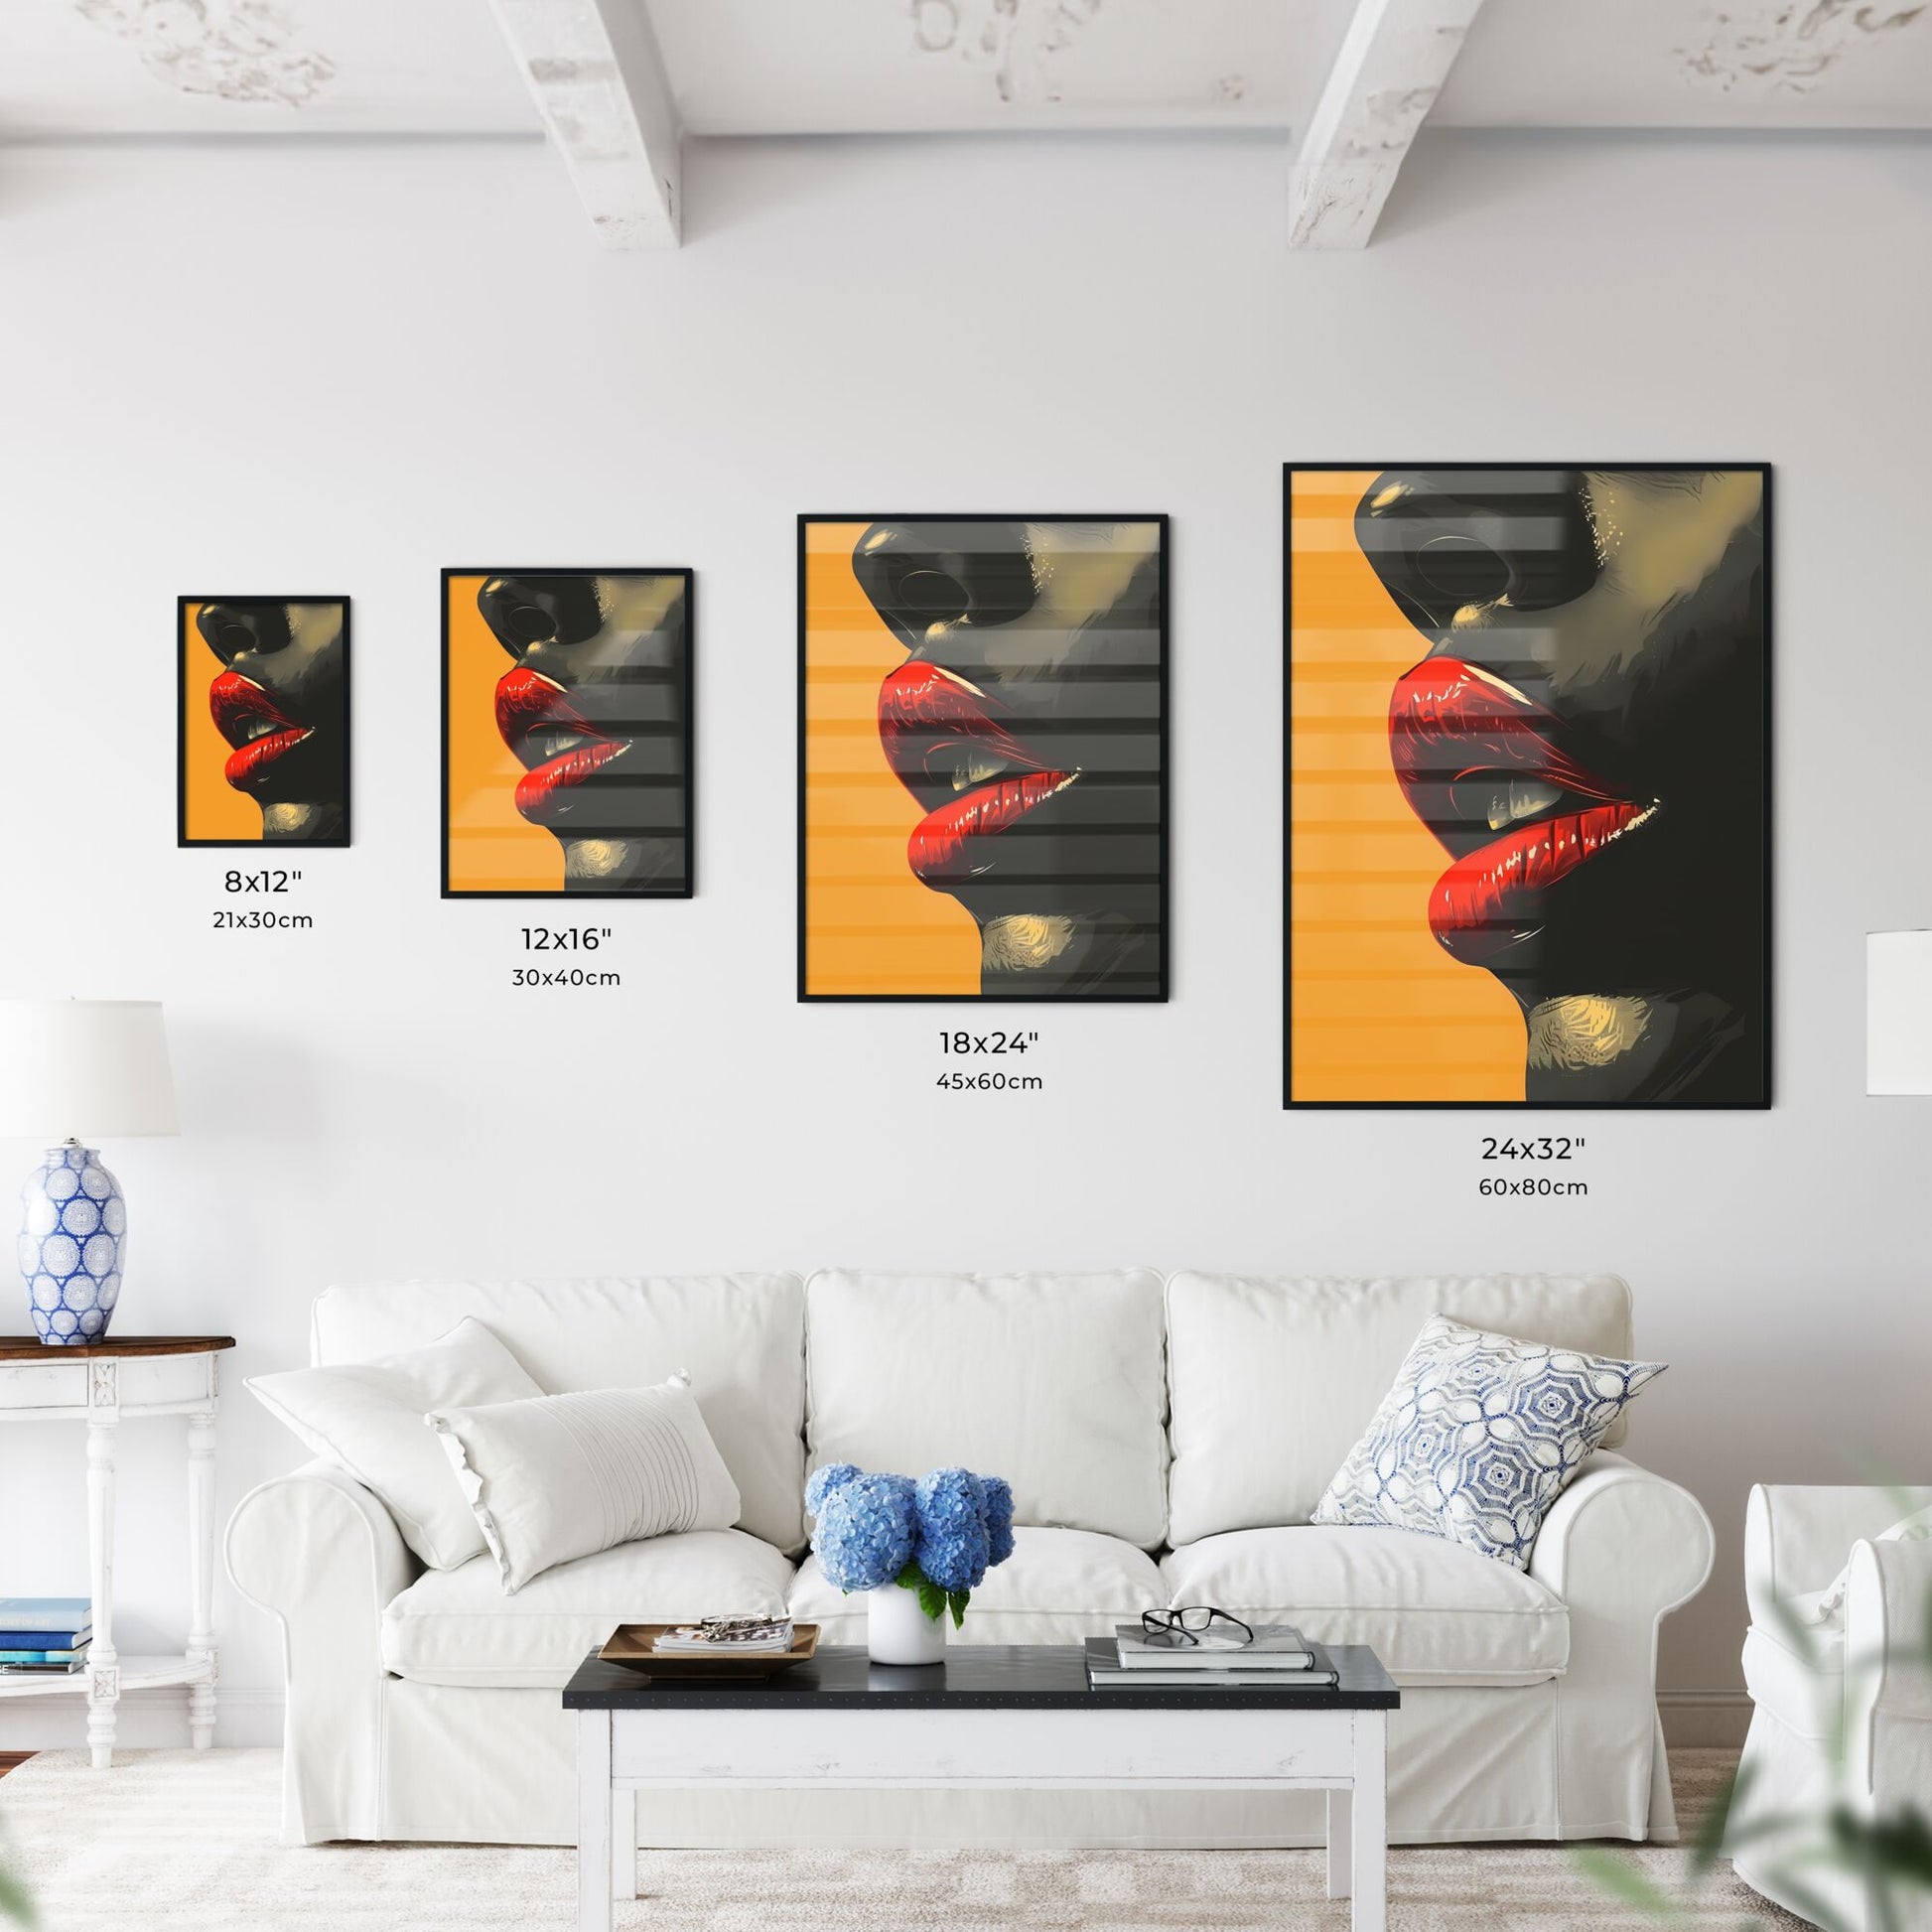 Vibrant Retro Poster: Proud, Strong Woman with Extraordinary Artistic Expression - Colorful Painting of a Slender, Young Black Girl Default Title